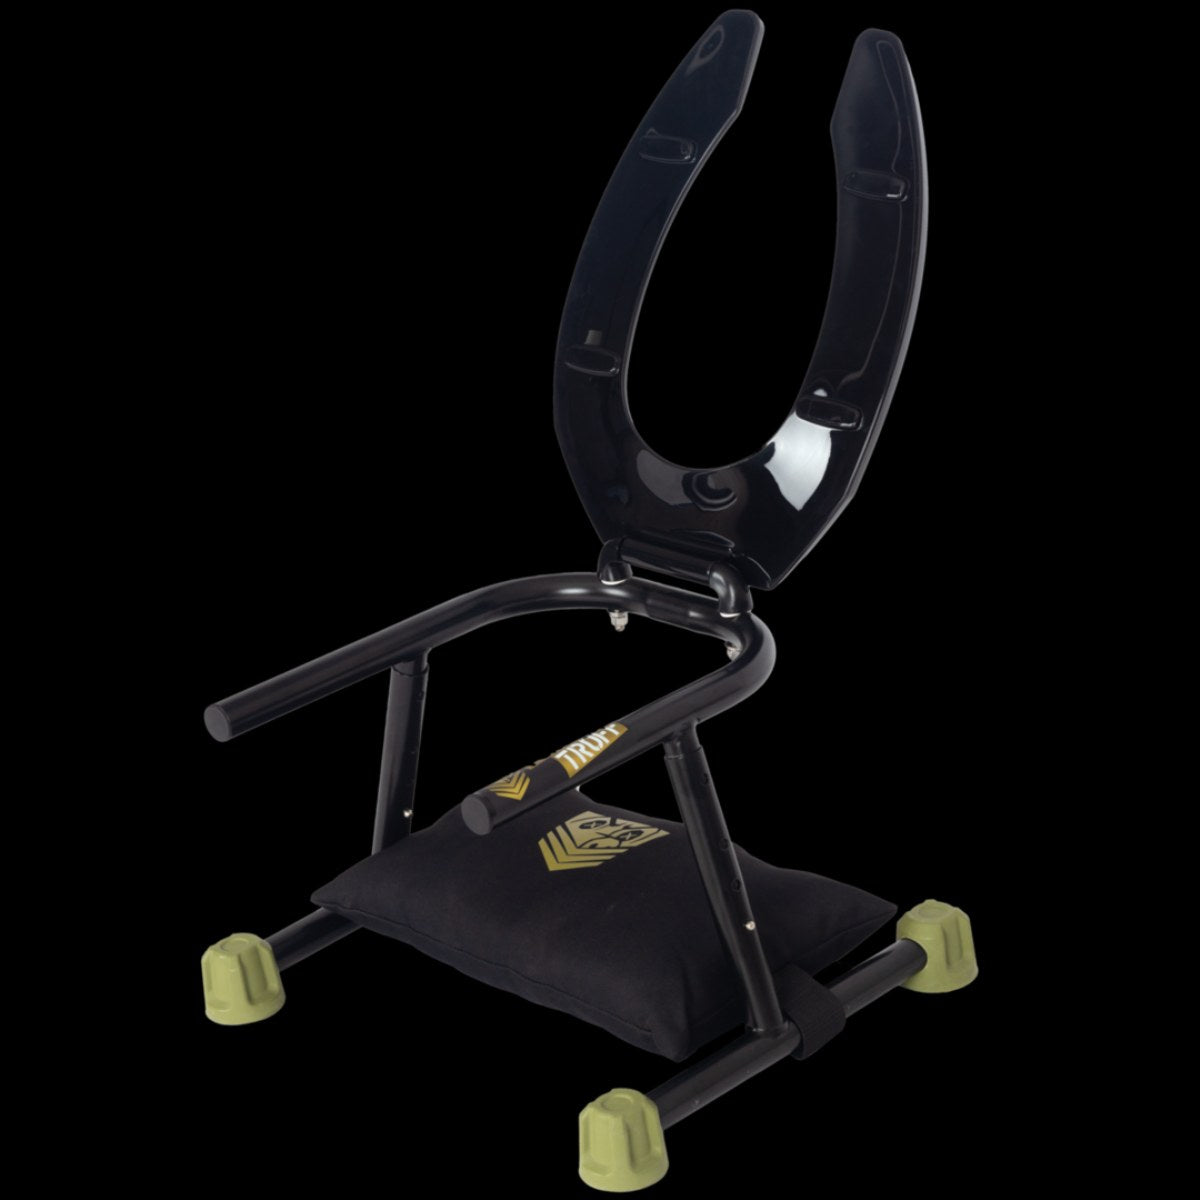 Extreme Obedience BDSM chair